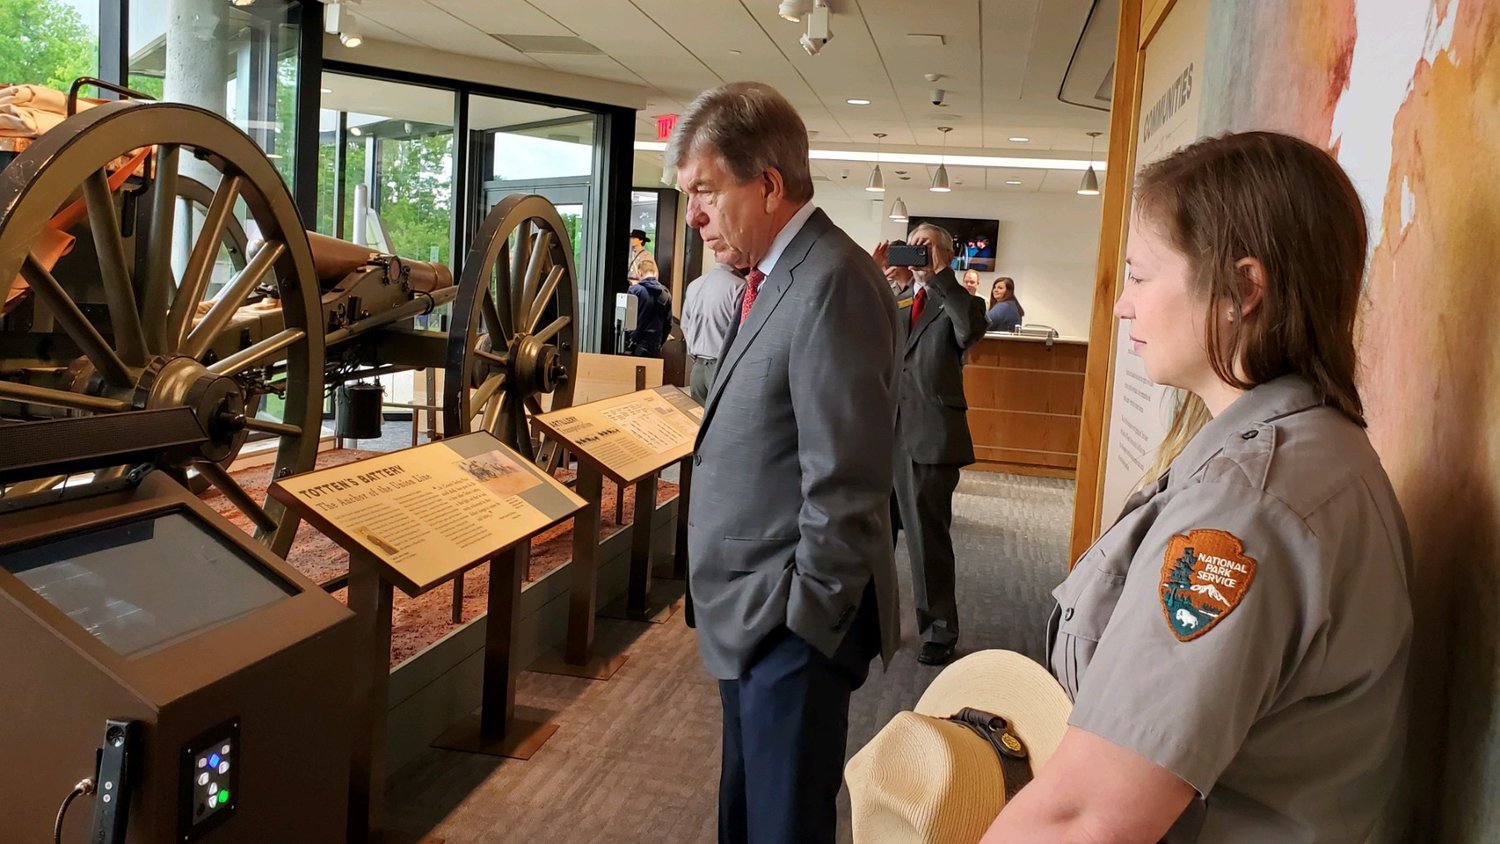 MUSEUM TOURSarah Cunningham, superintendent of Wilson’s Creek National Battlefield, on May 28 shows U.S. Sen. Roy Blunt, R-Missouri, the park’s newly remodeled museum and visitor center. Blunt was in town to commemorate the reopening of the center after millions of dollars worth of renovations and expansions. The center welcomes guests to the 2,010-acre park.